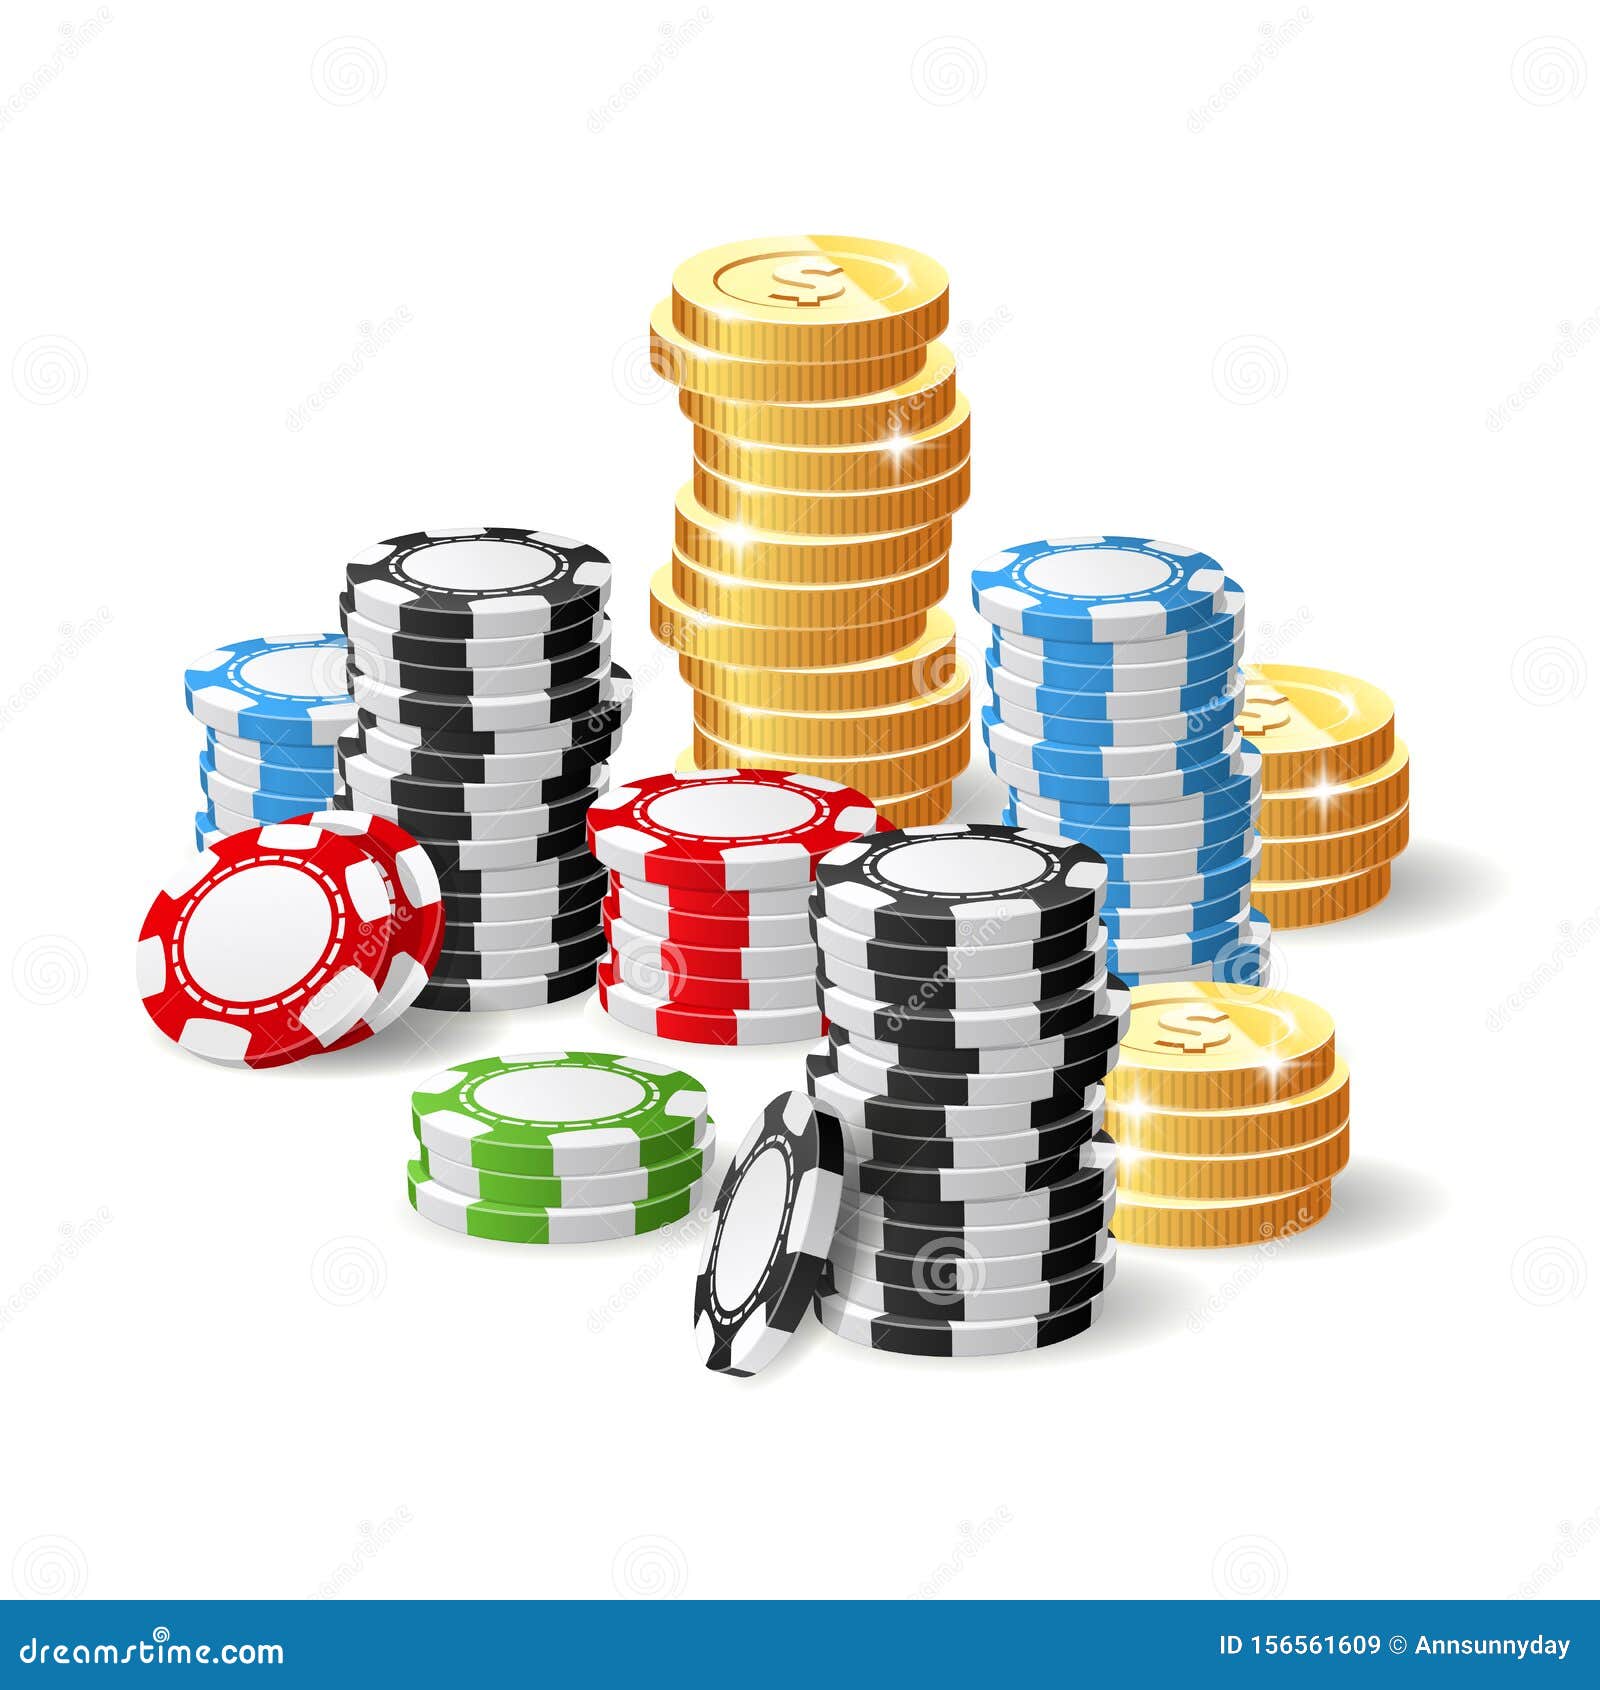 What Everyone Ought To Know About best bitcoin casinos